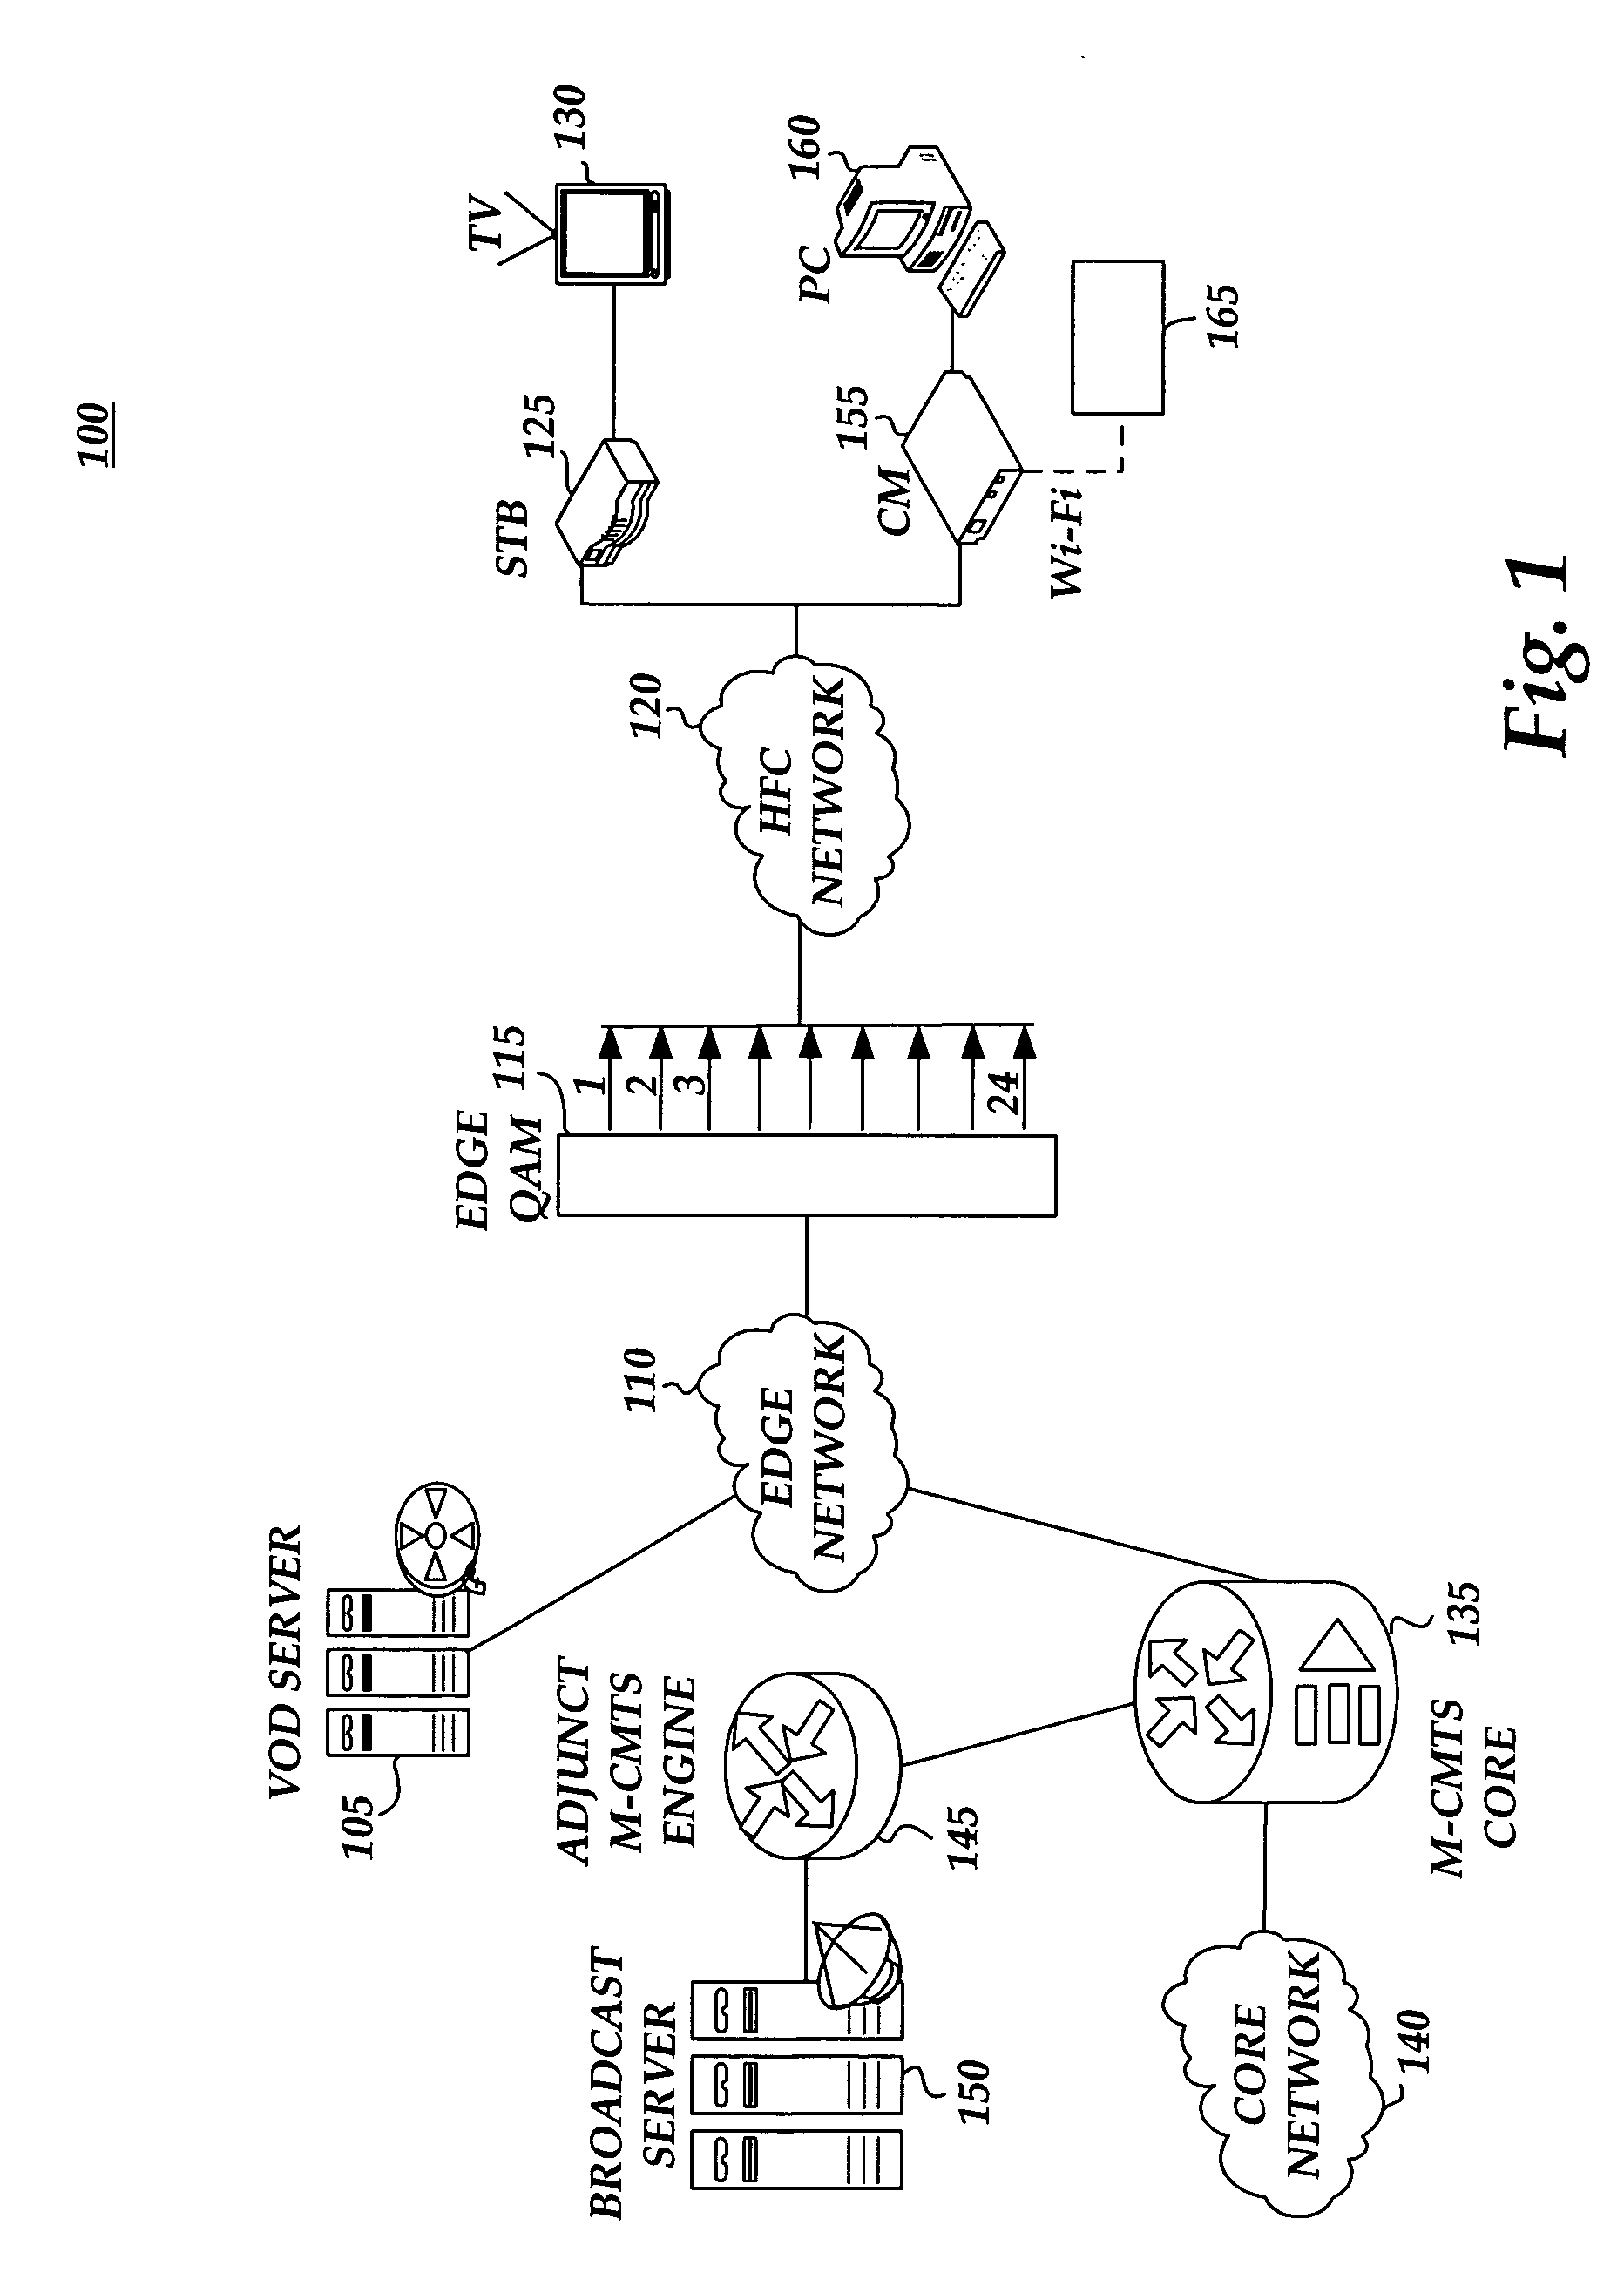 Methods and systems for providing Internet protocol video over a multicast bonded group